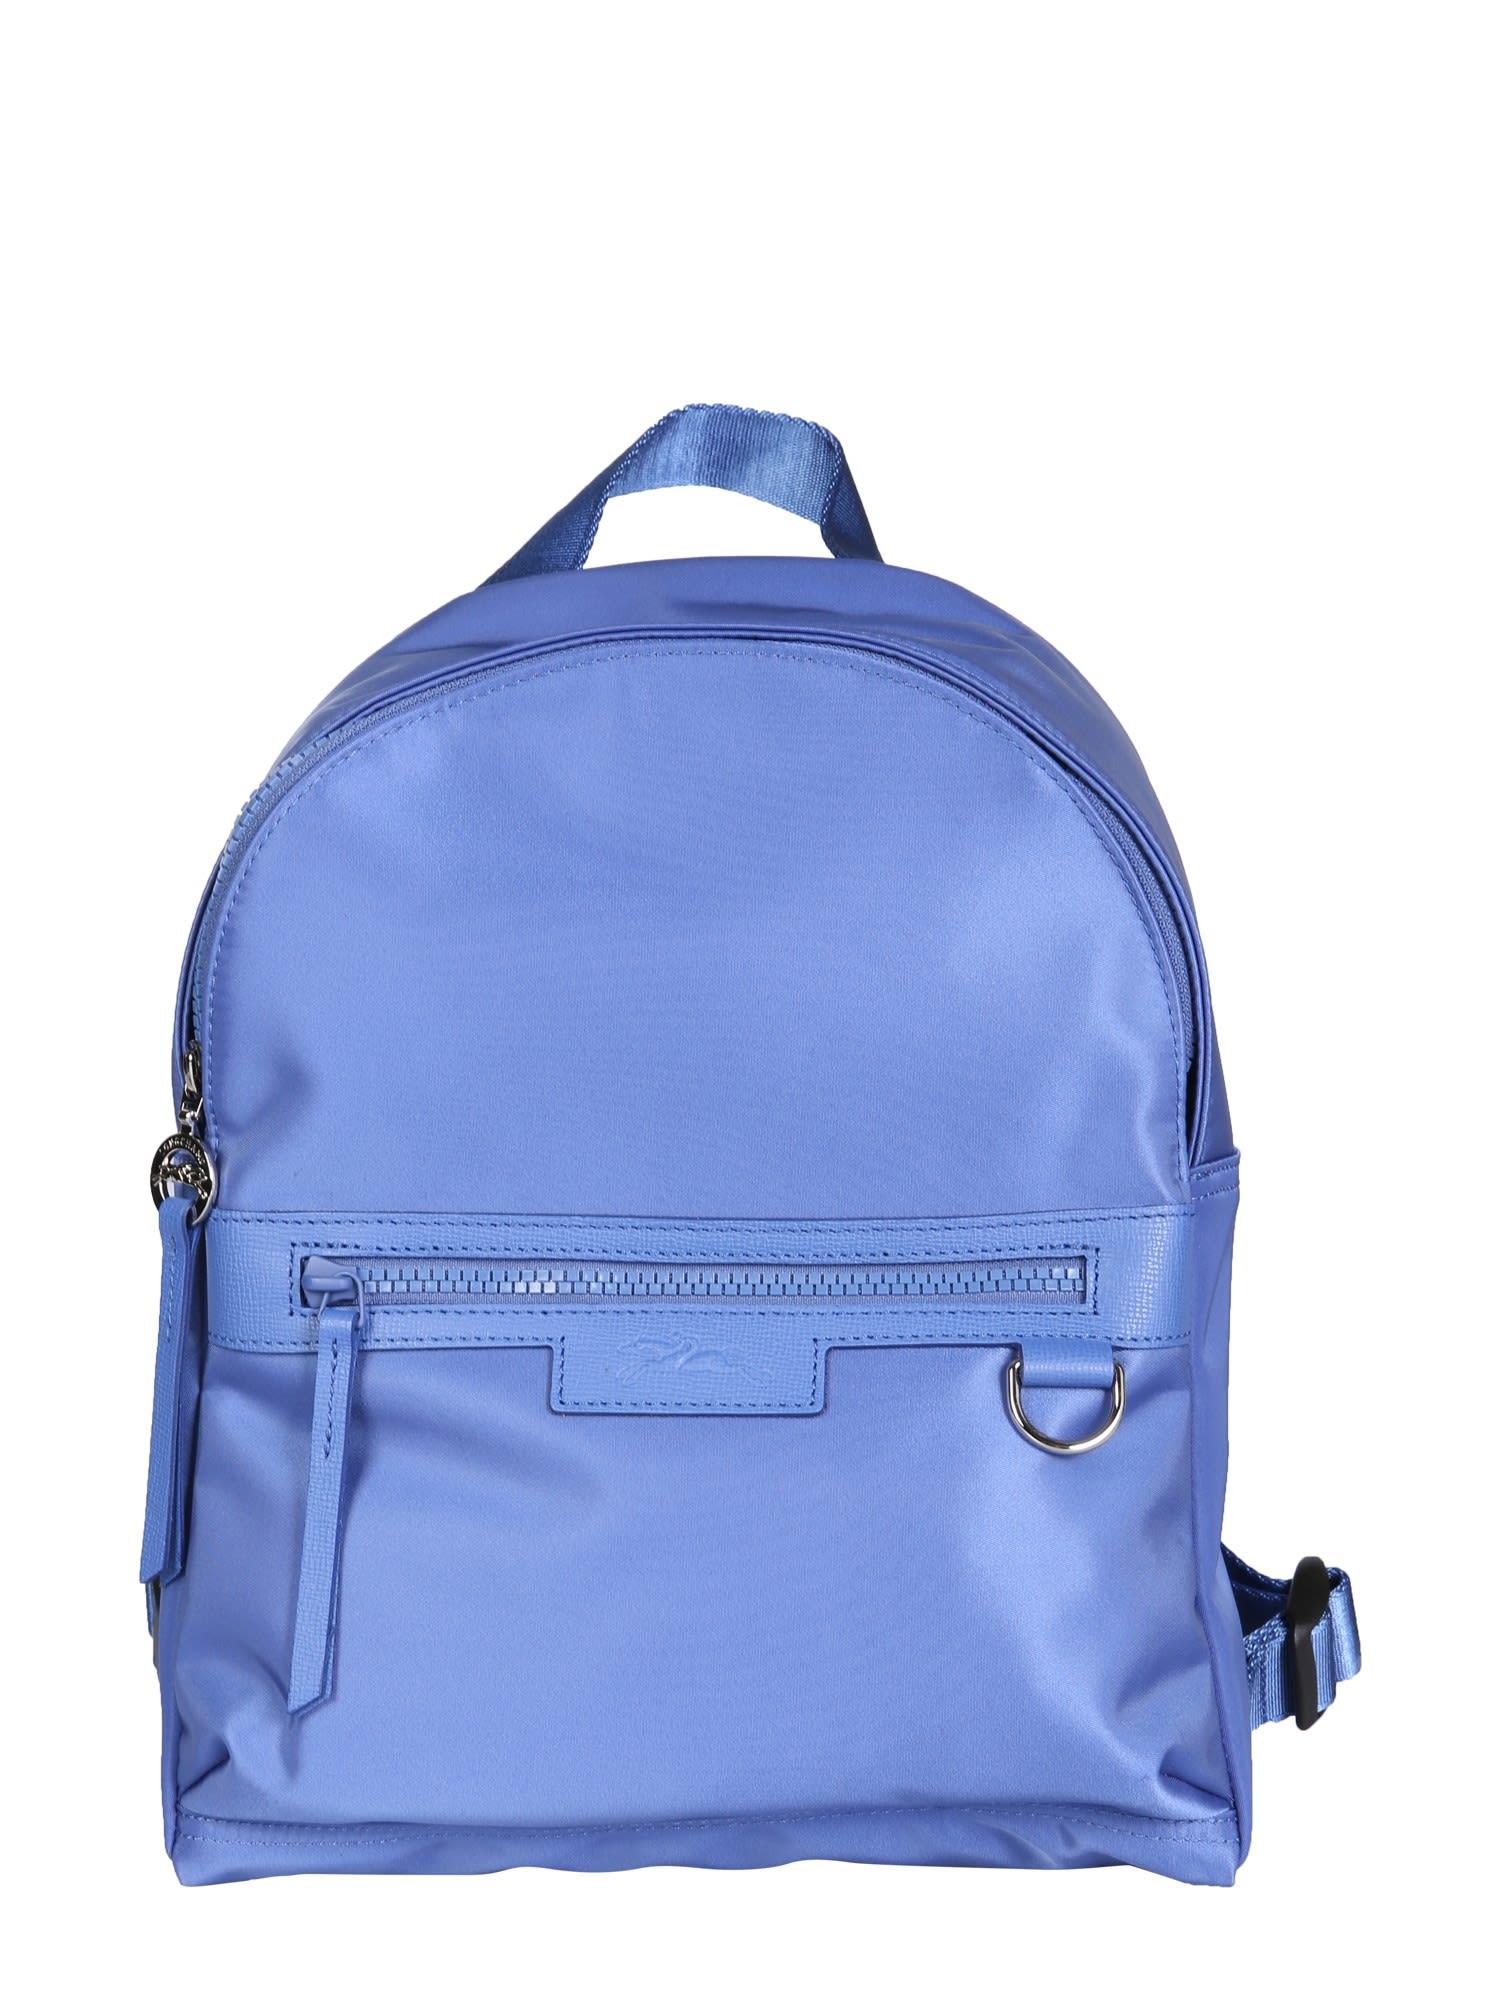 Longchamp Le Pliage Cuir Backpack in Blue NWT  Backpacks, Longchamp le  pliage, Fashion backpack